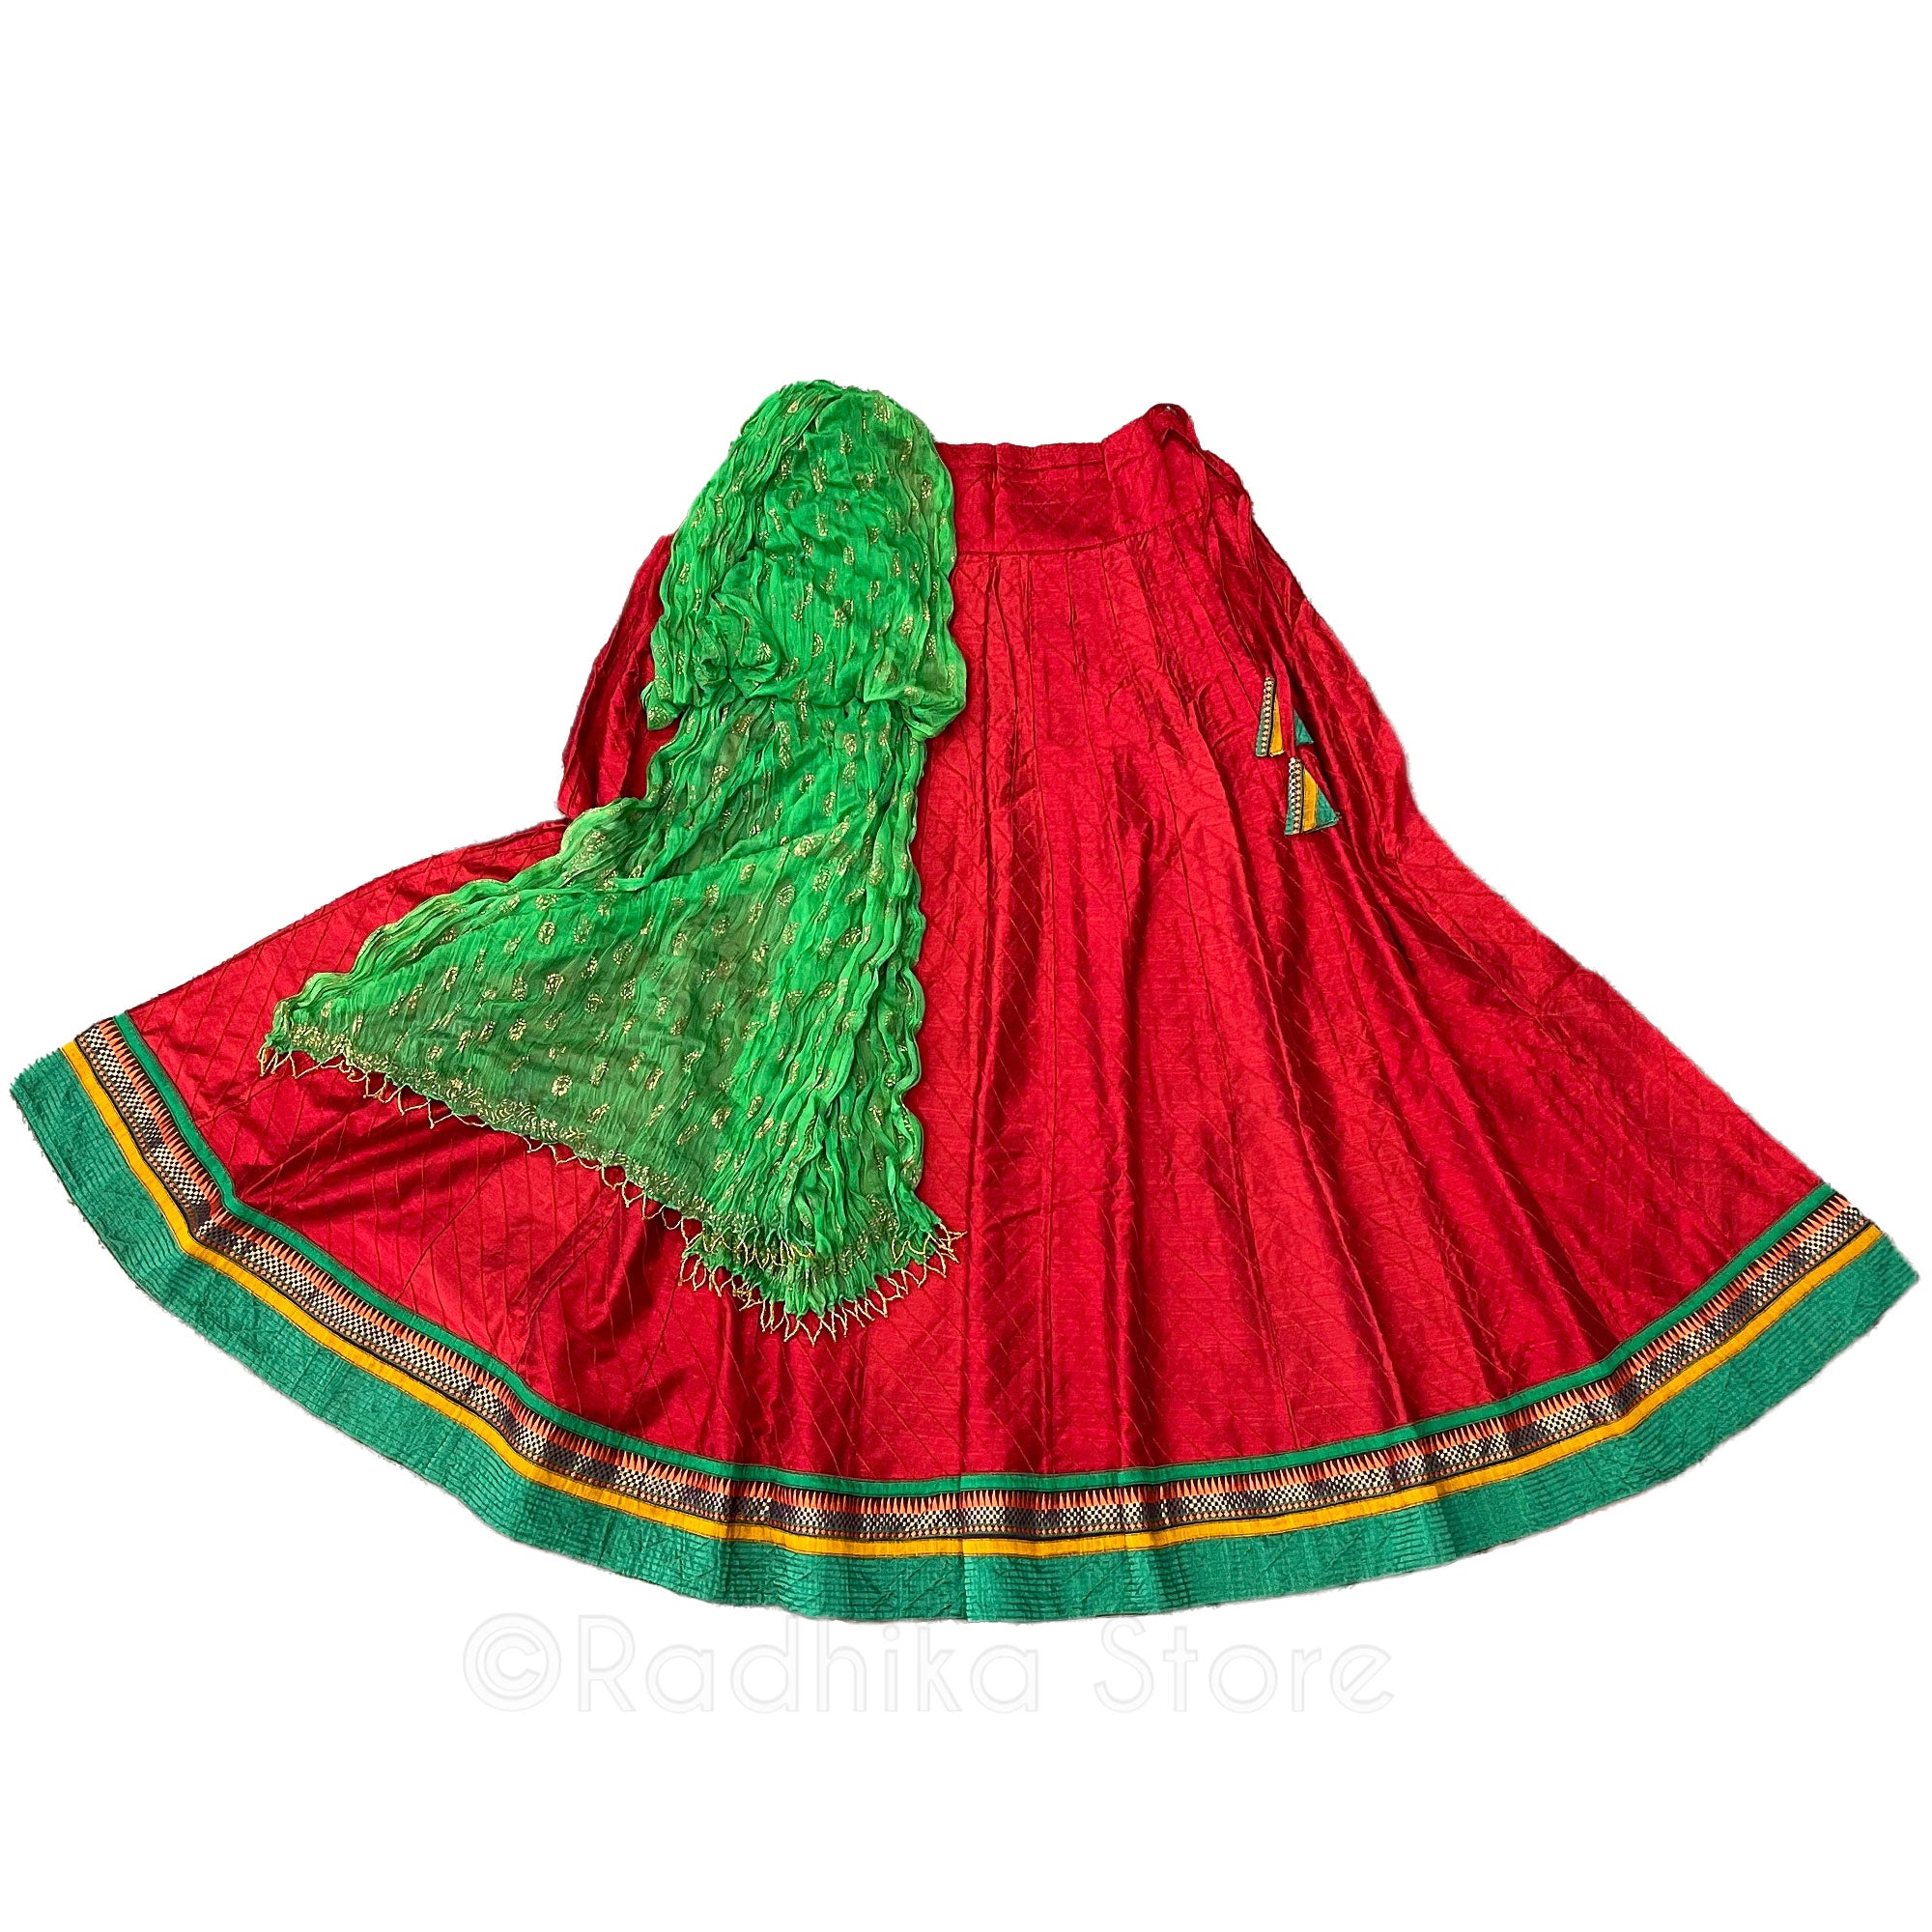 Vedic Colors - Gopi Skirt - Bright Deep Red and Green -Jute-Cotton-Gopi Skirt- With Green Chadar - Small Or Large